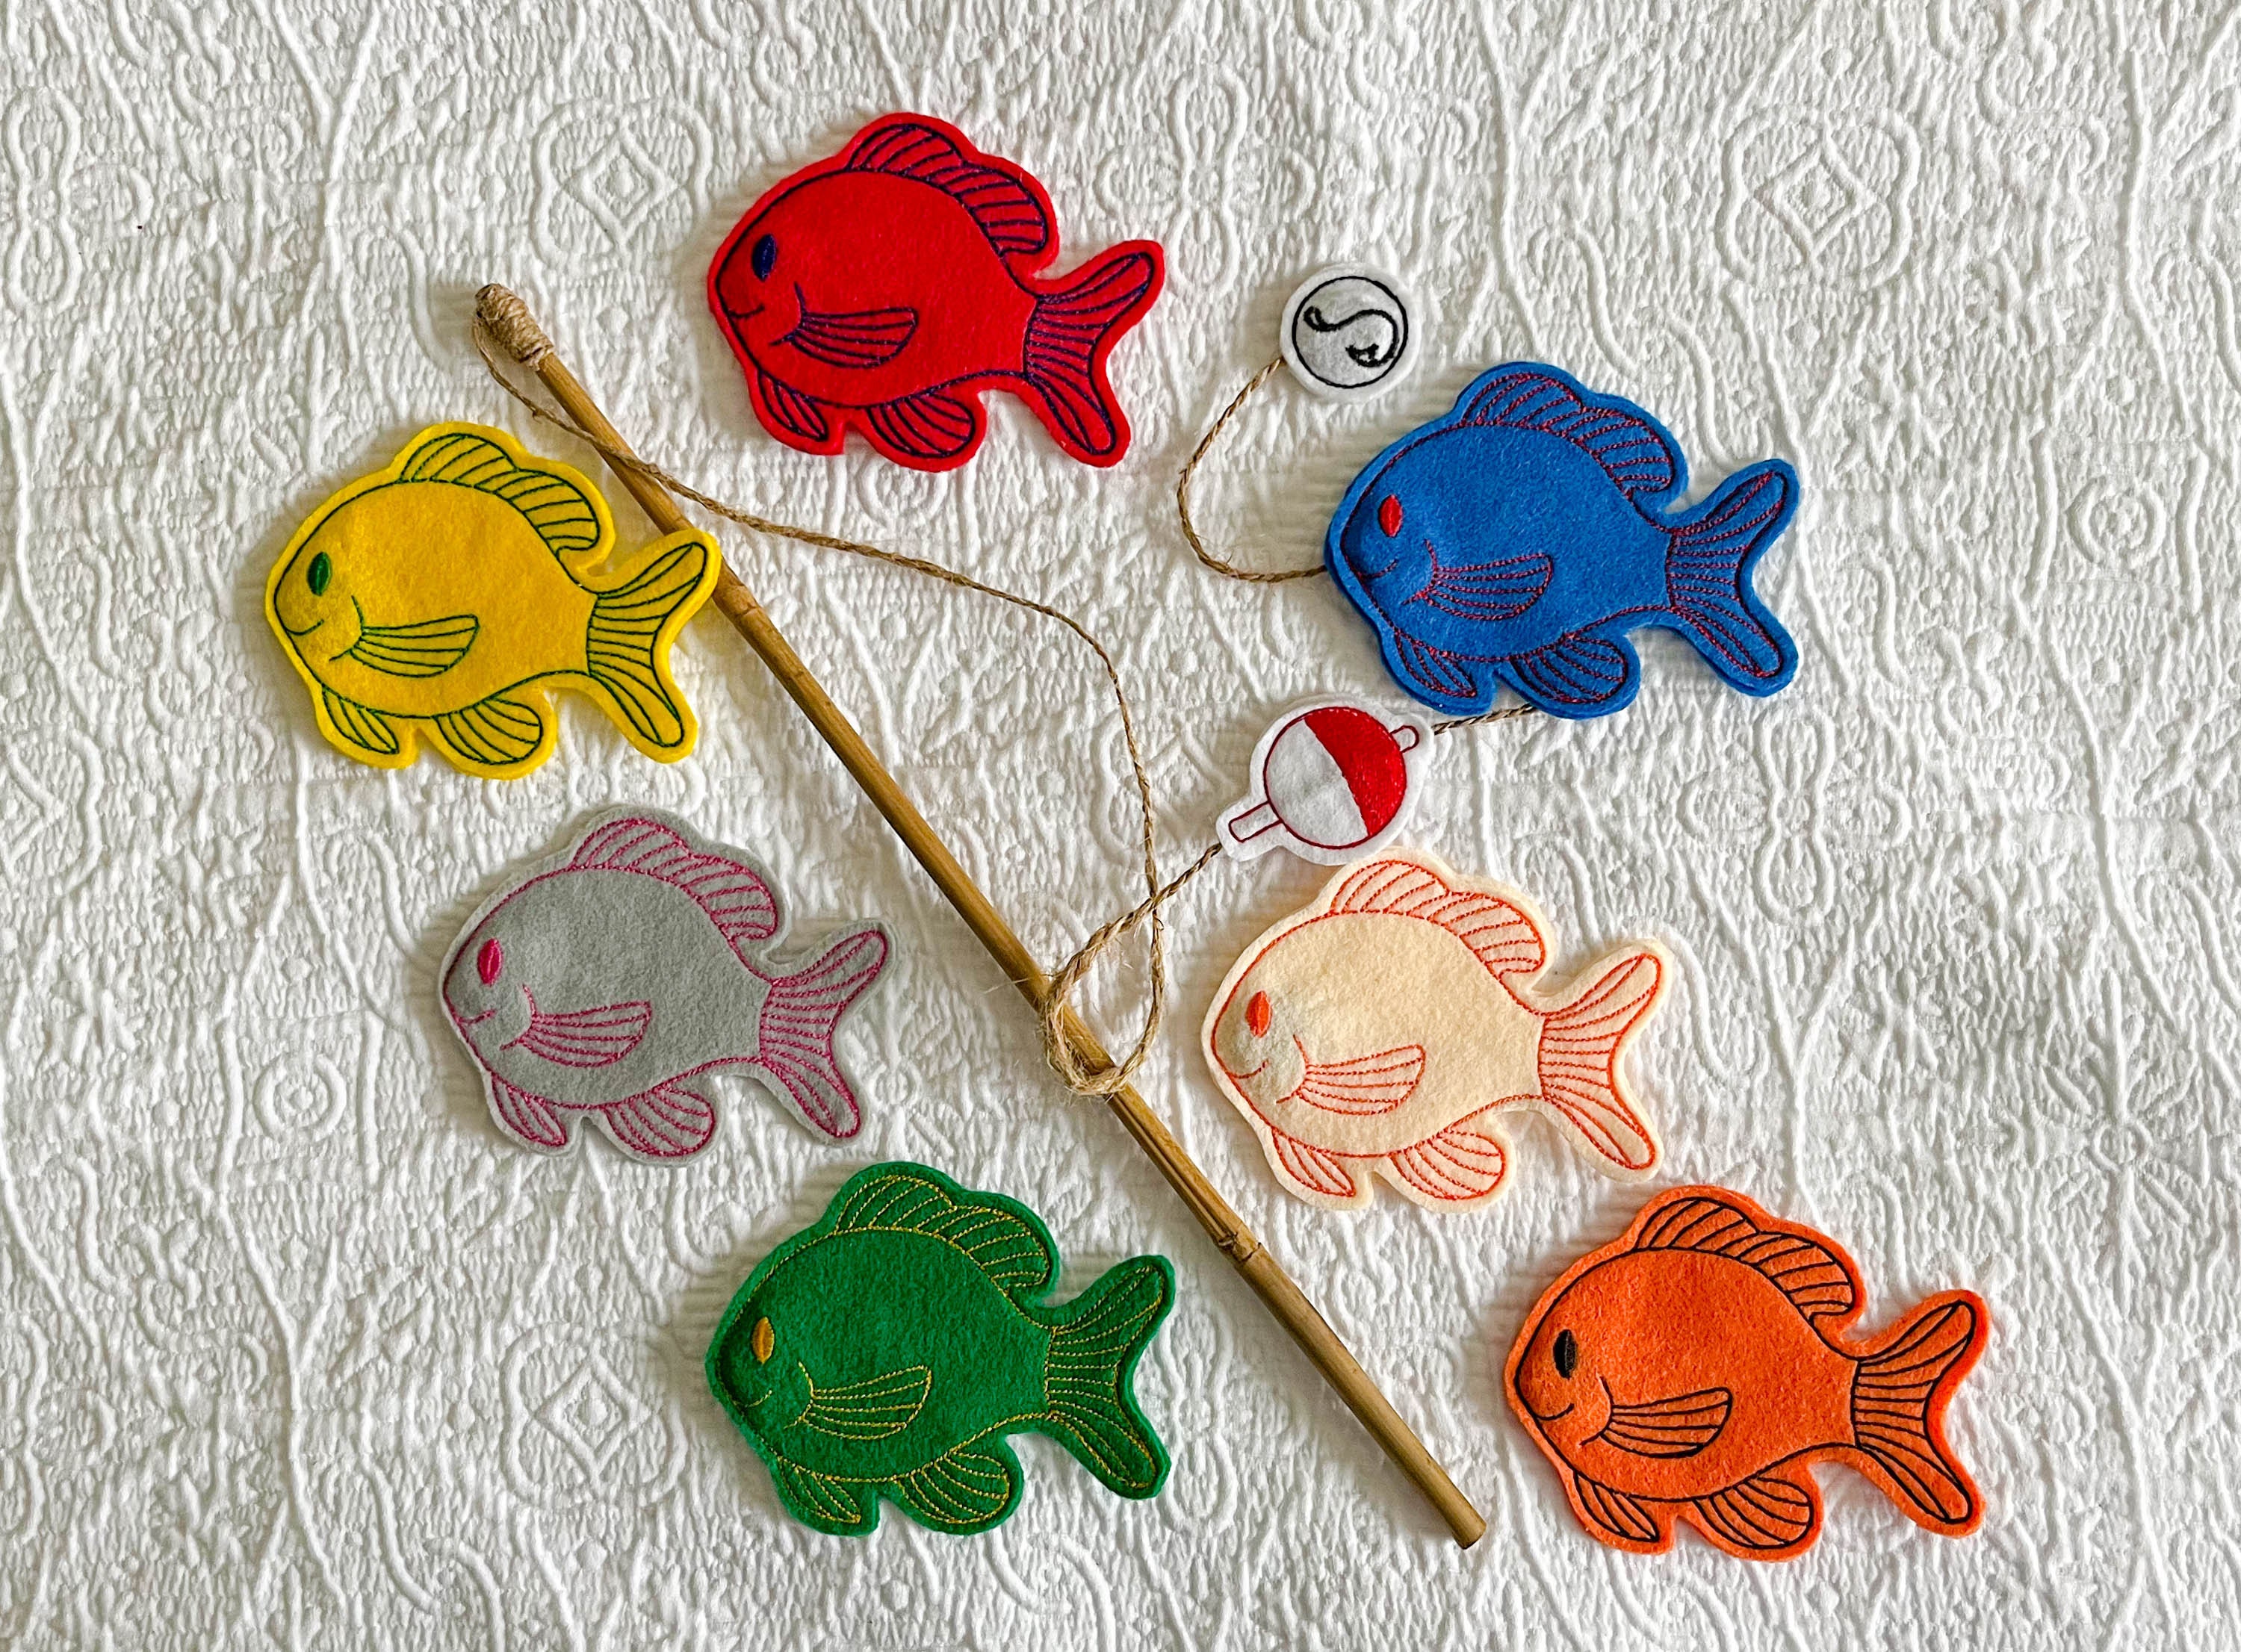 Rcanedny 5 Pieces Magnetic Fishing Toy Pole Magnetic Ghana